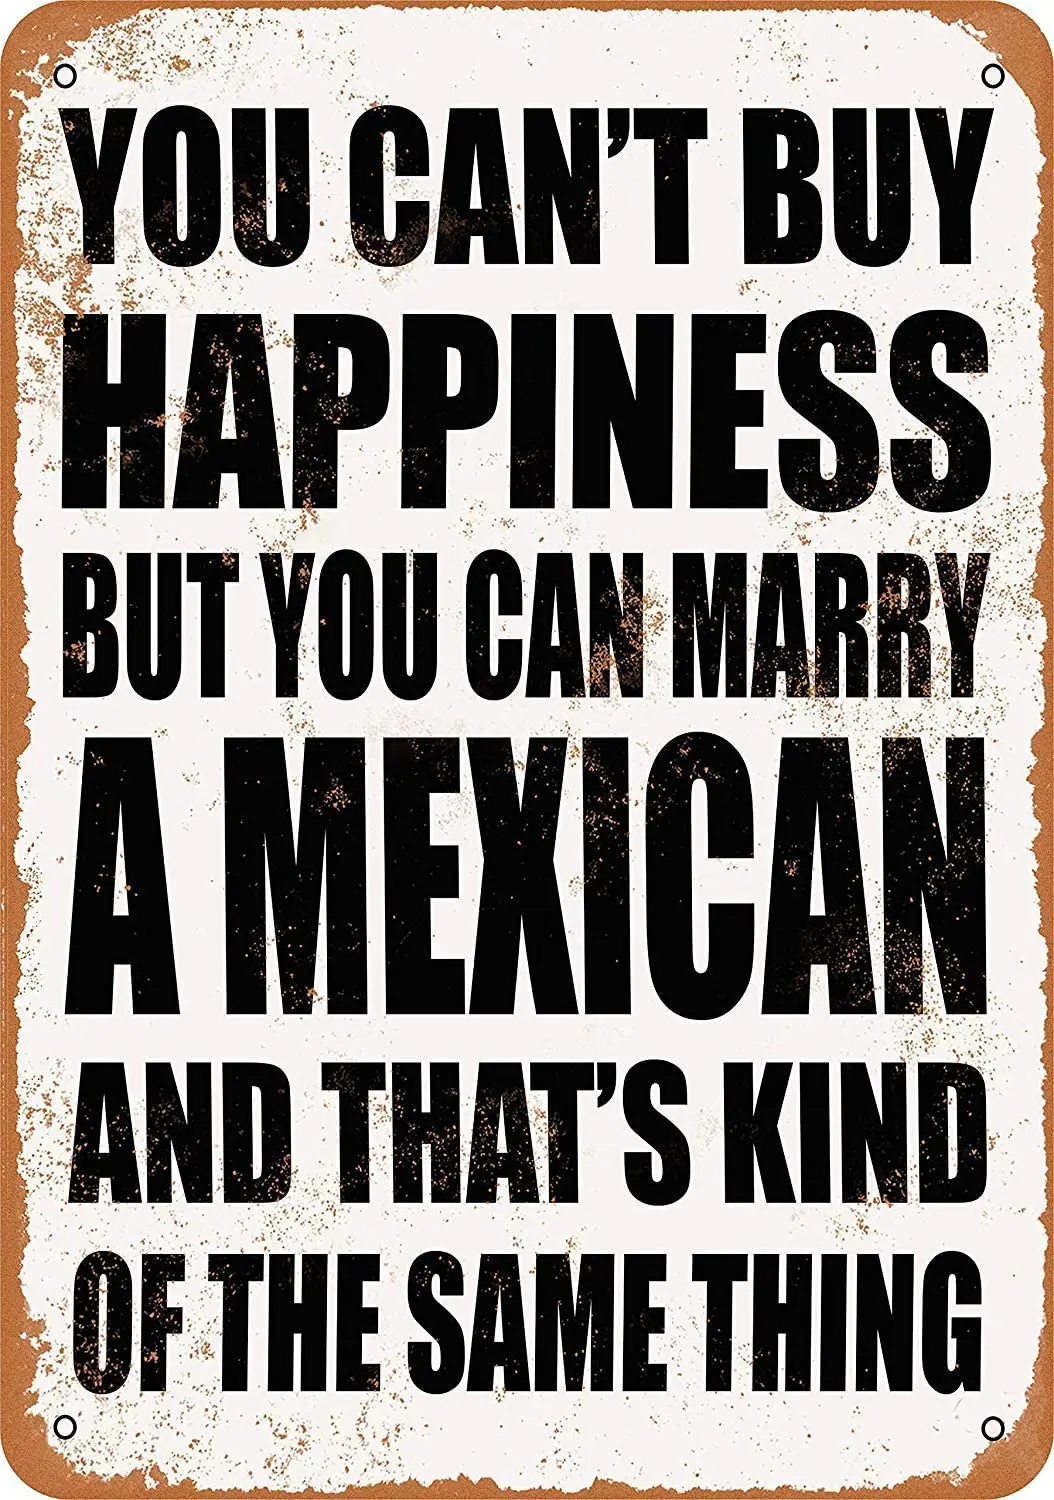 Kexle 8 x 12 メタルサイン - You Can't Buy Happiness BUT You CAN Marry A Costa Ric  【☆安心の定価販売☆】